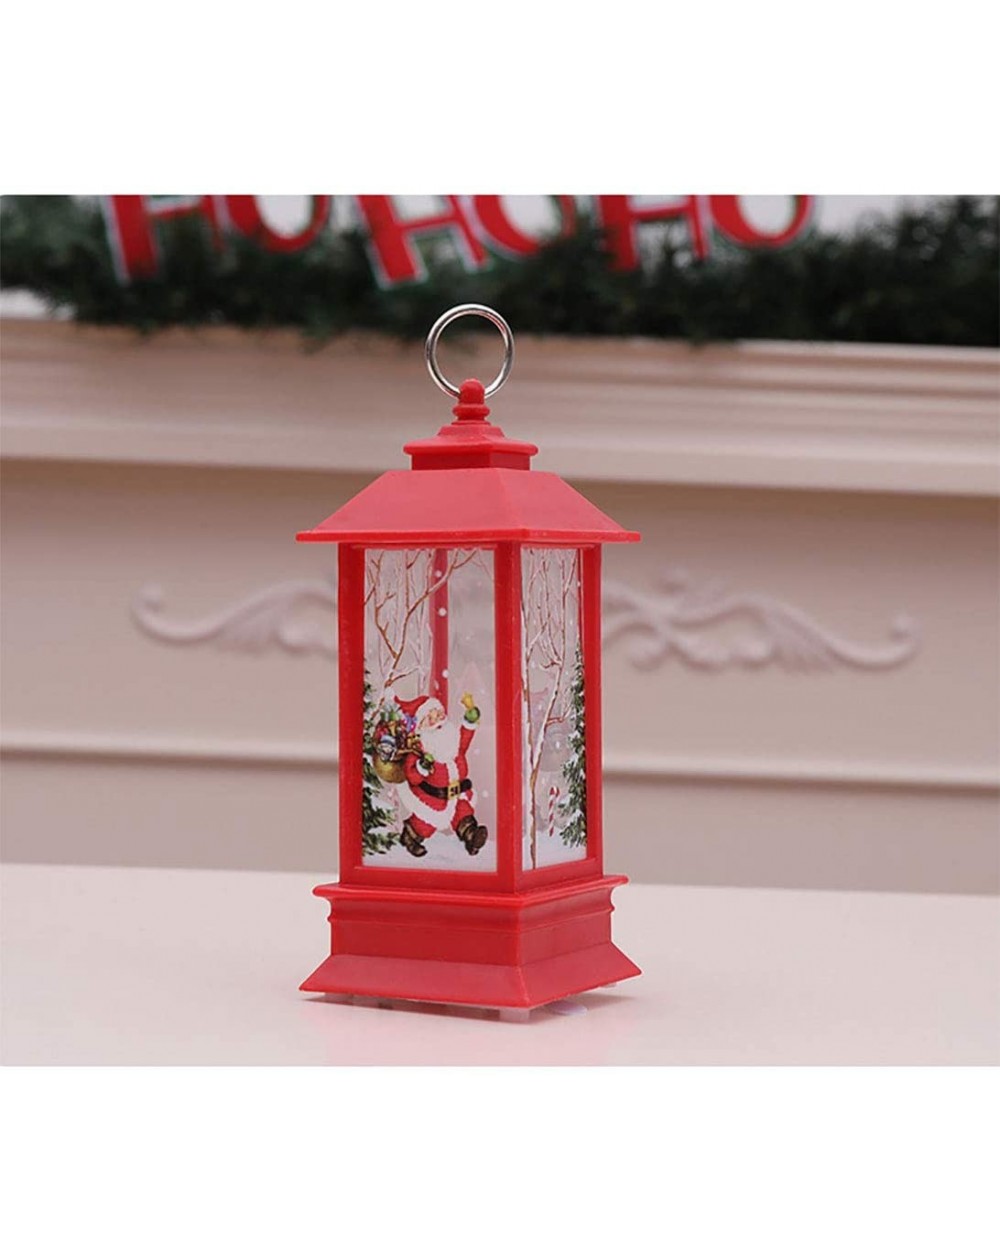 Candleholders Portable Christmas Decoration Lantern- 7.9-inch Tall Christmas Santa Claus Flame Red Lamp Hanging Fairytale Dec...